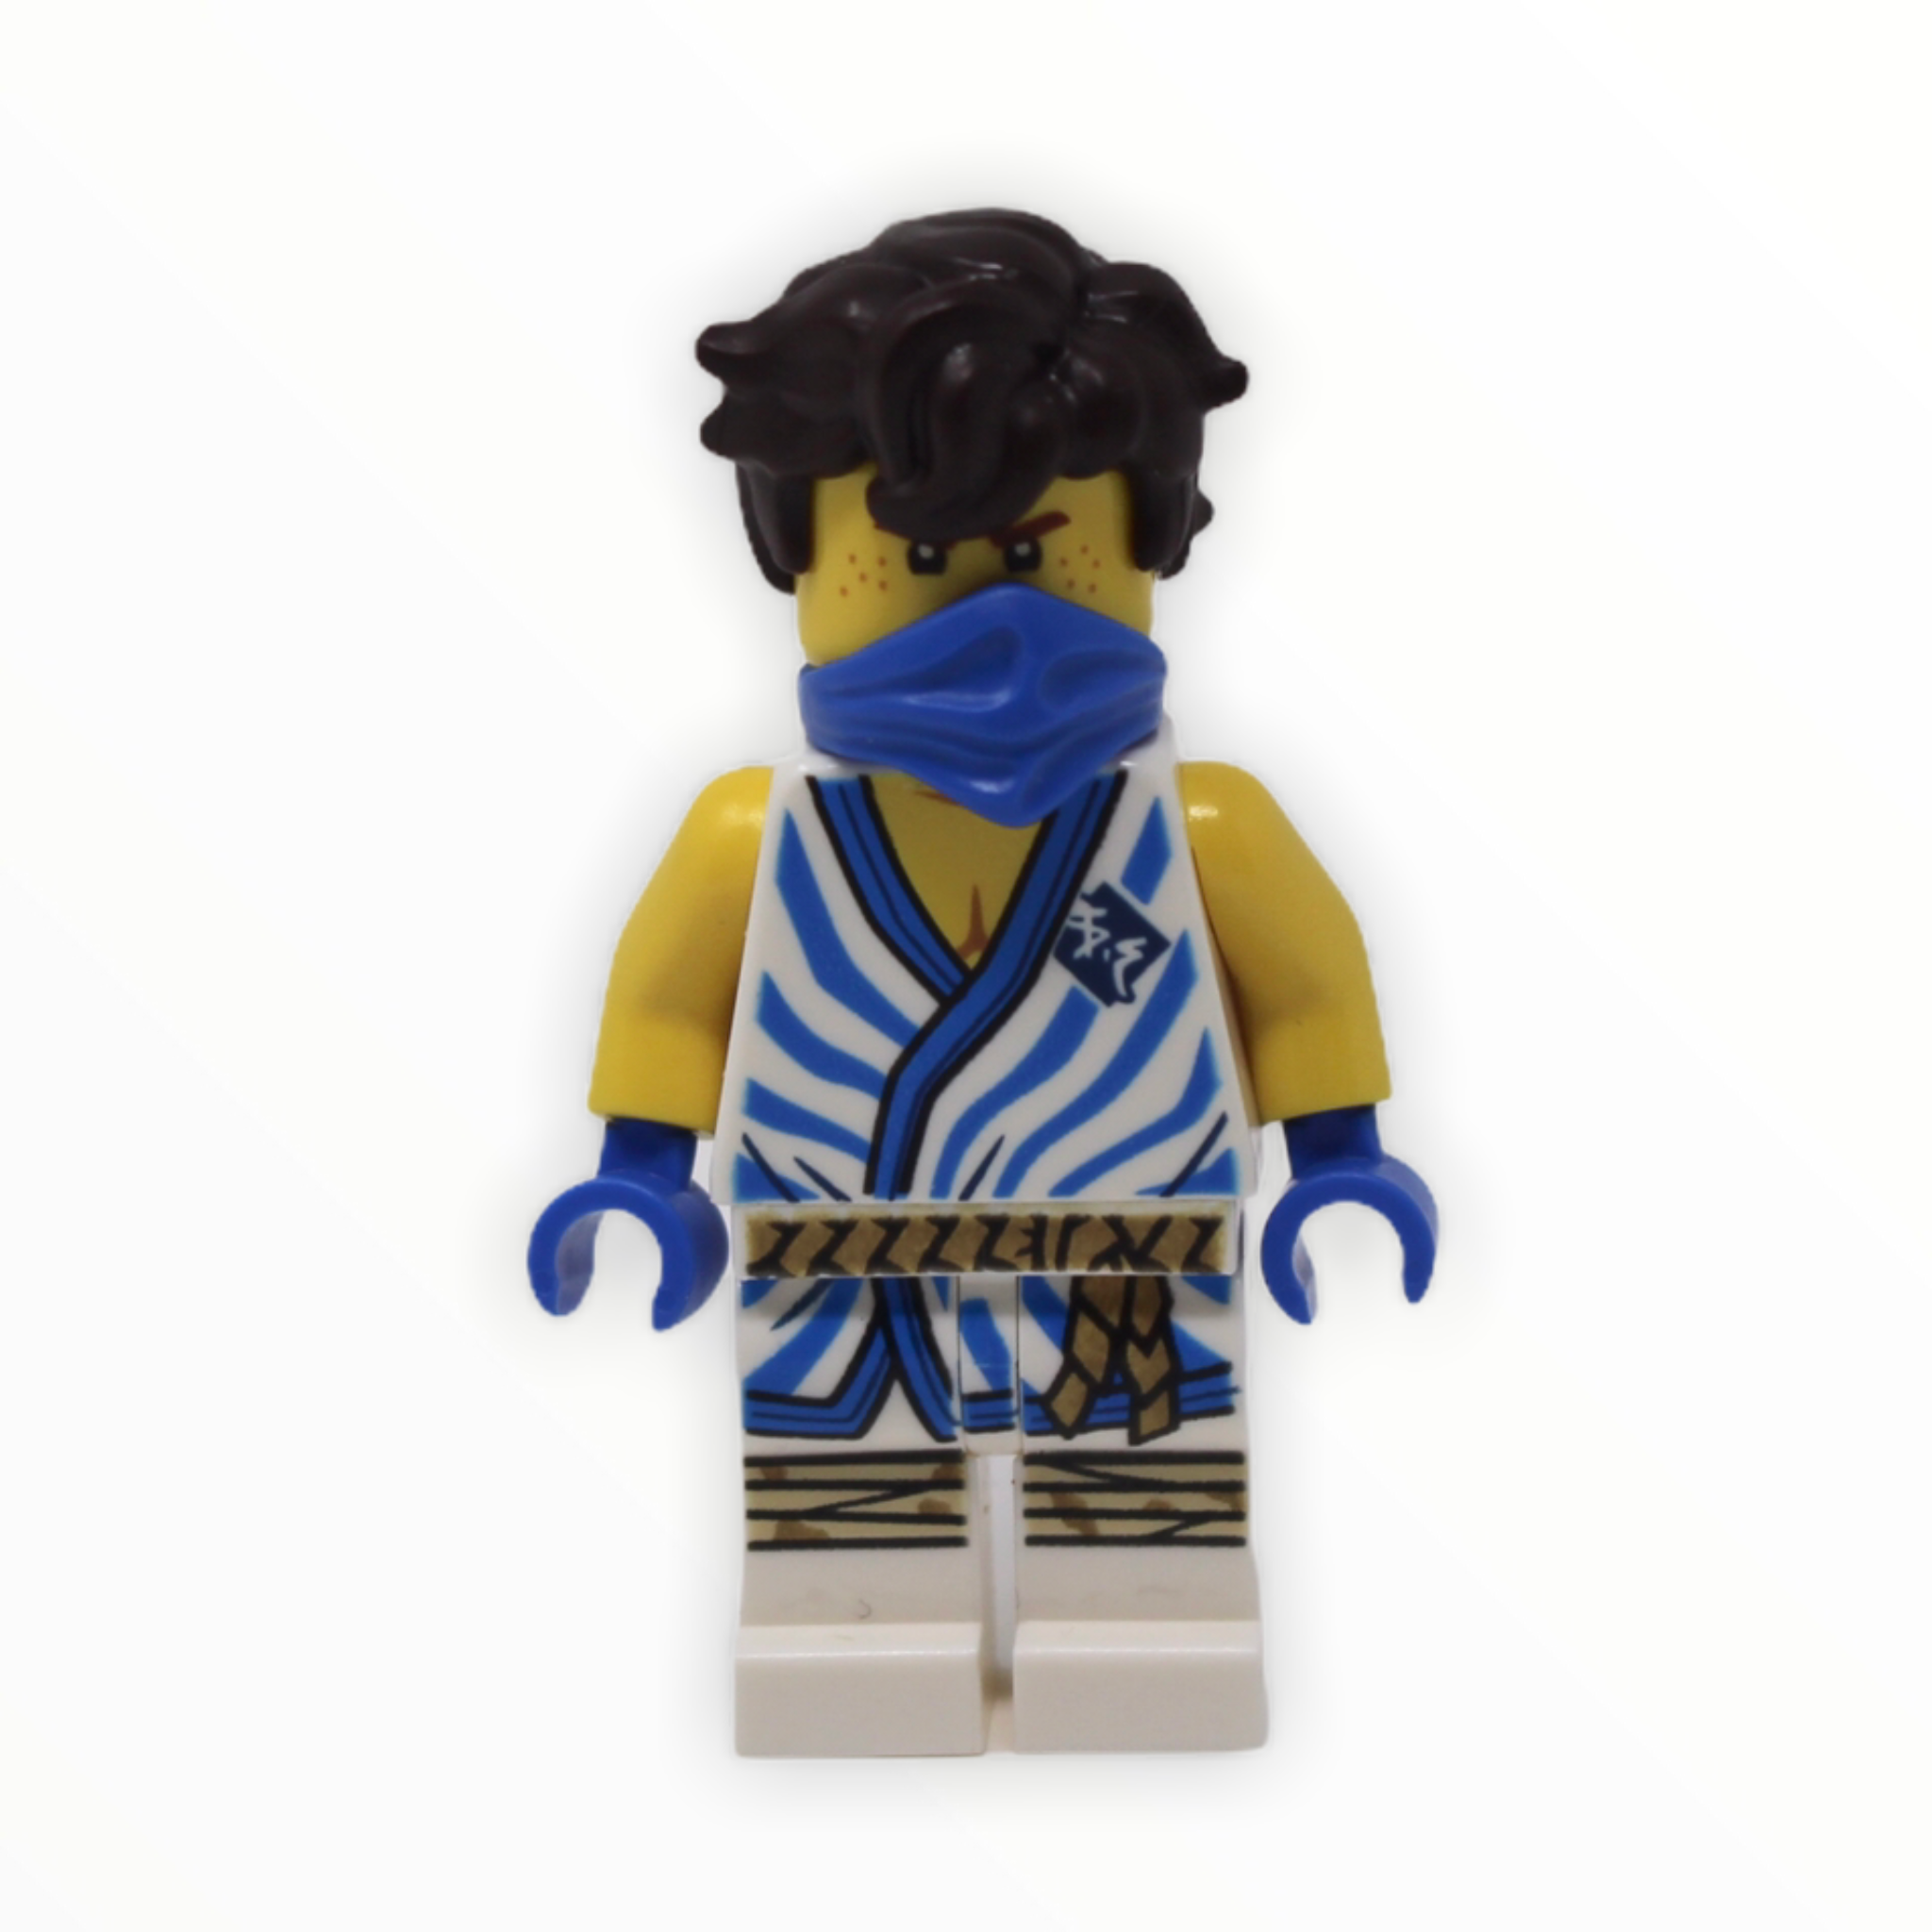 Jay (Legacy, white tunic, blue trim and stripes)